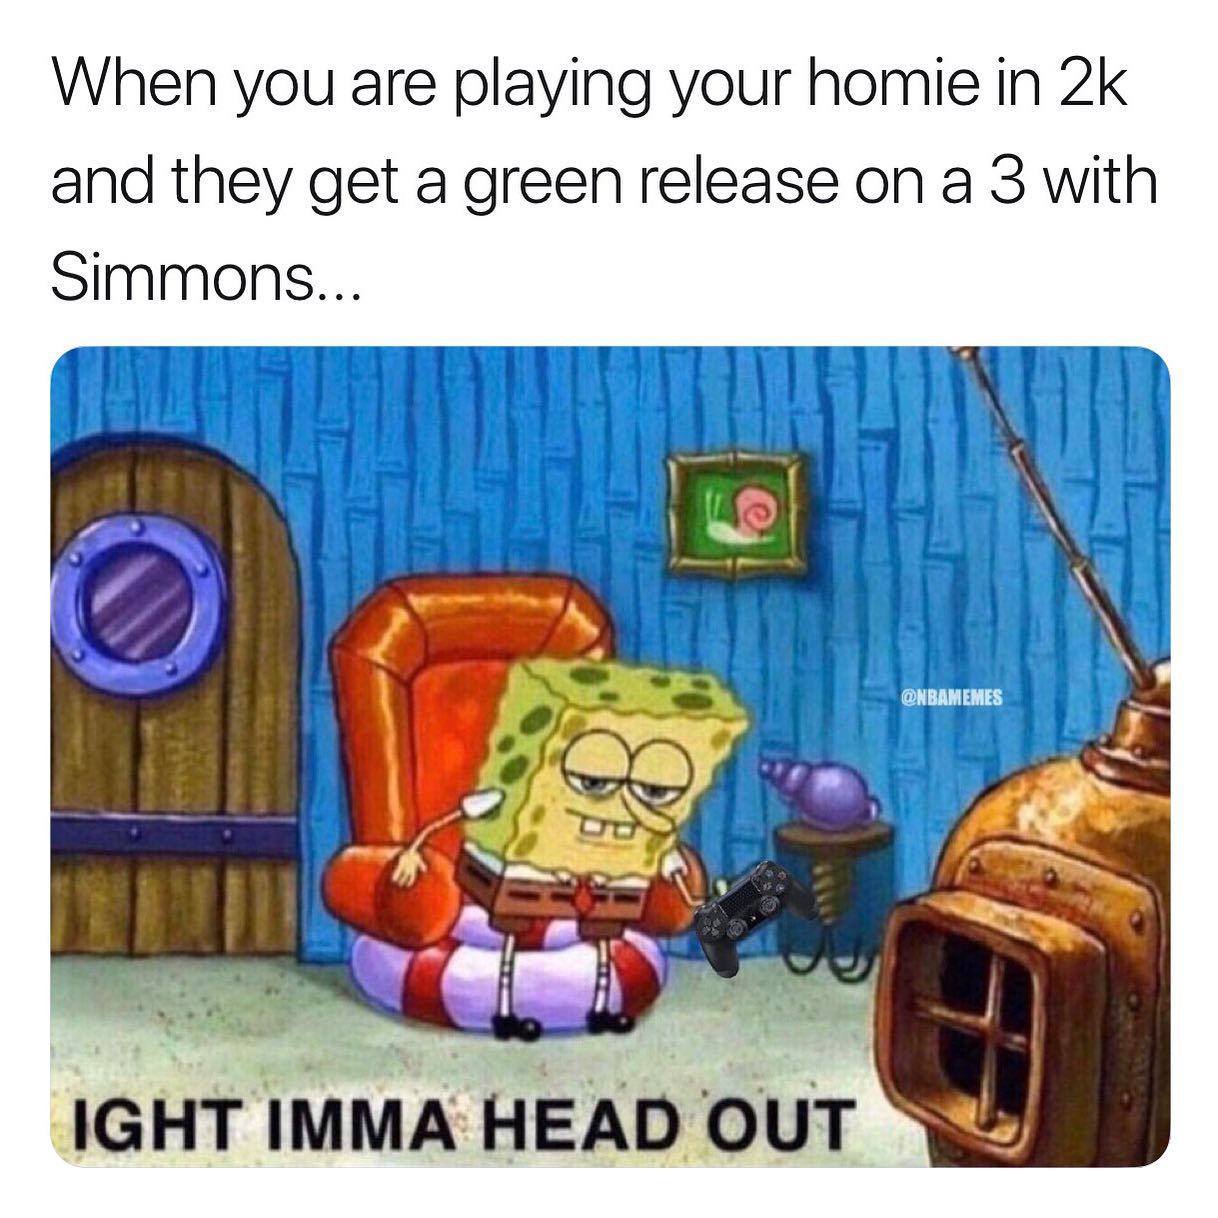 ight ima head out - christmas nurse meme - When you are playing your homie in 2k and they get a green release on a 3 with Simmons... Ight Imma Head Out